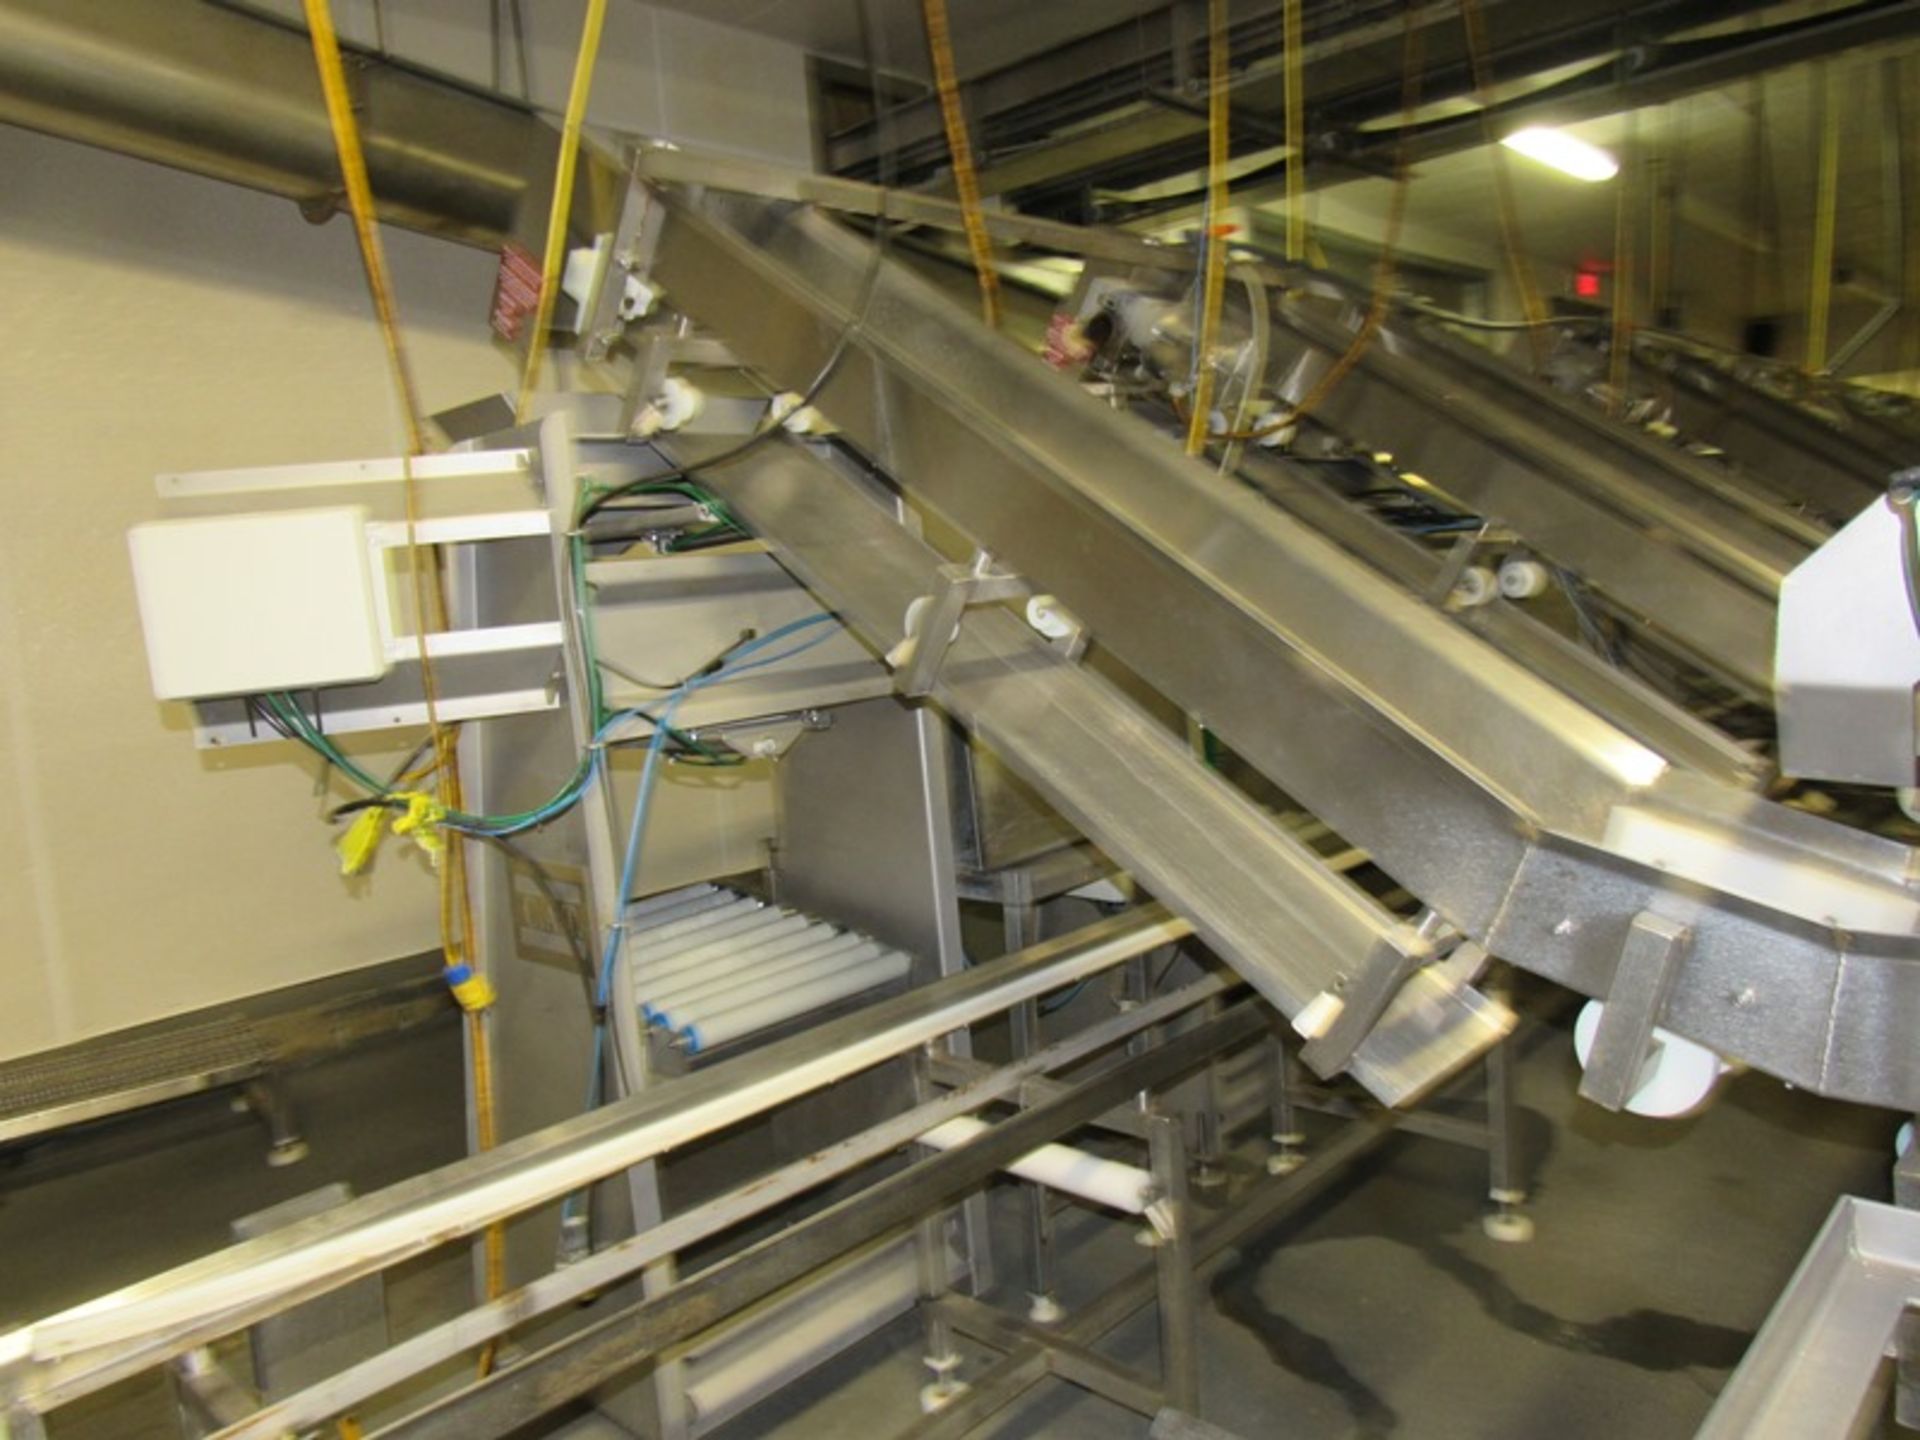 C.A.T. Single Lane Conveyor, 10" W X 48' L with inclined conveyors each side, 10" W X 9' L (no